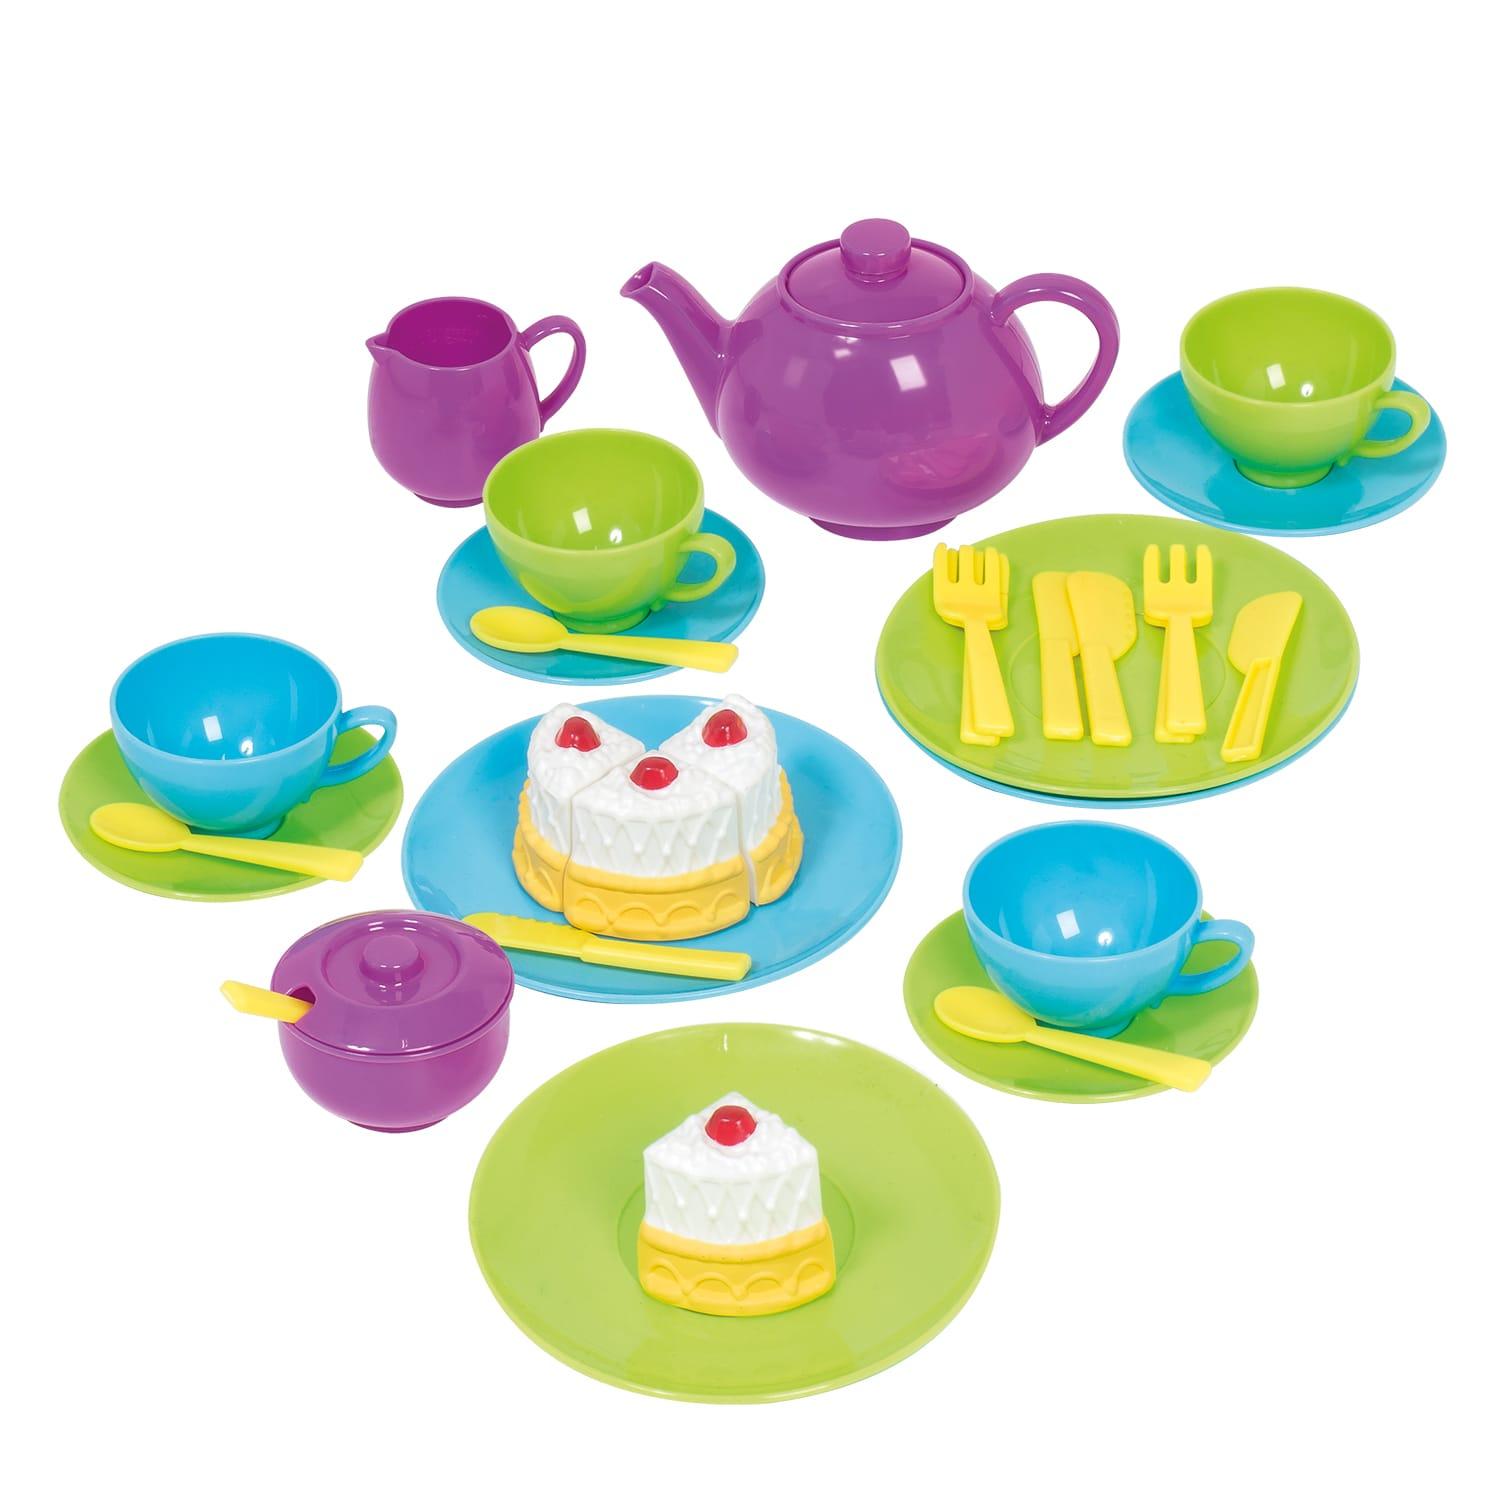 32 Pieces Casdon Tea Set Role Pretend Play Kids Childrens Toy Playset Gift Cook 